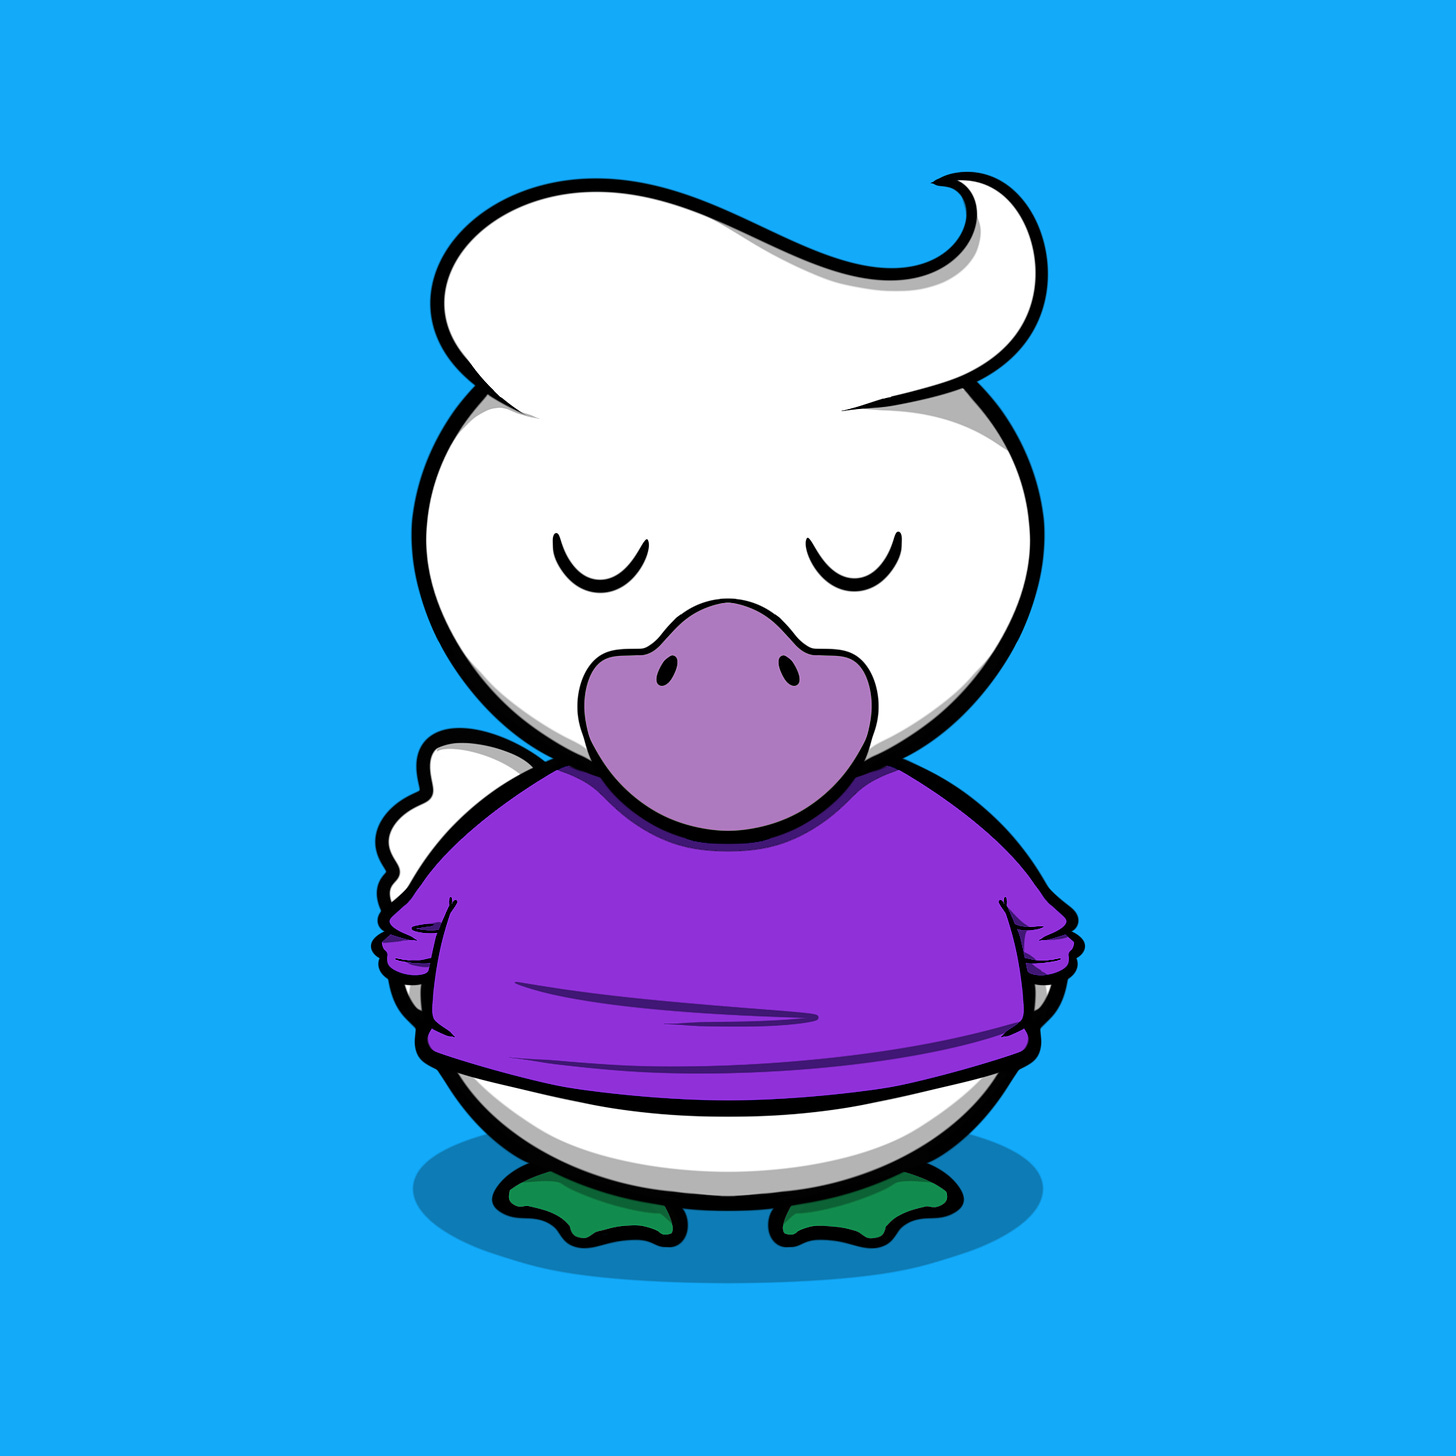 A purple-shirted duck on a blue background.